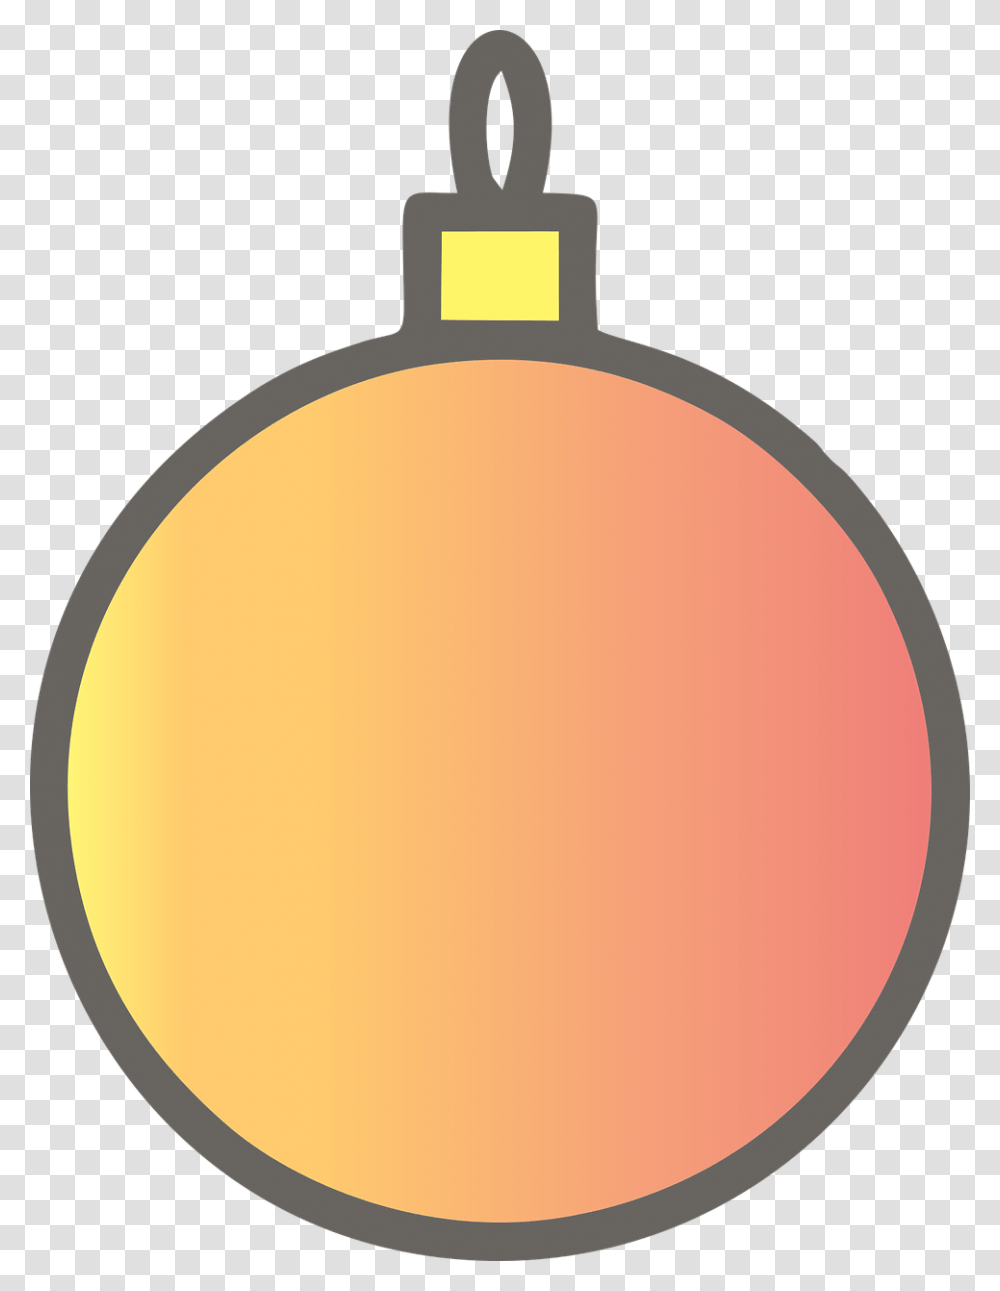 Christmas Tree Toy New Year Free Vector Graphic On Pixabay Clip Art, Ornament, Plant Transparent Png